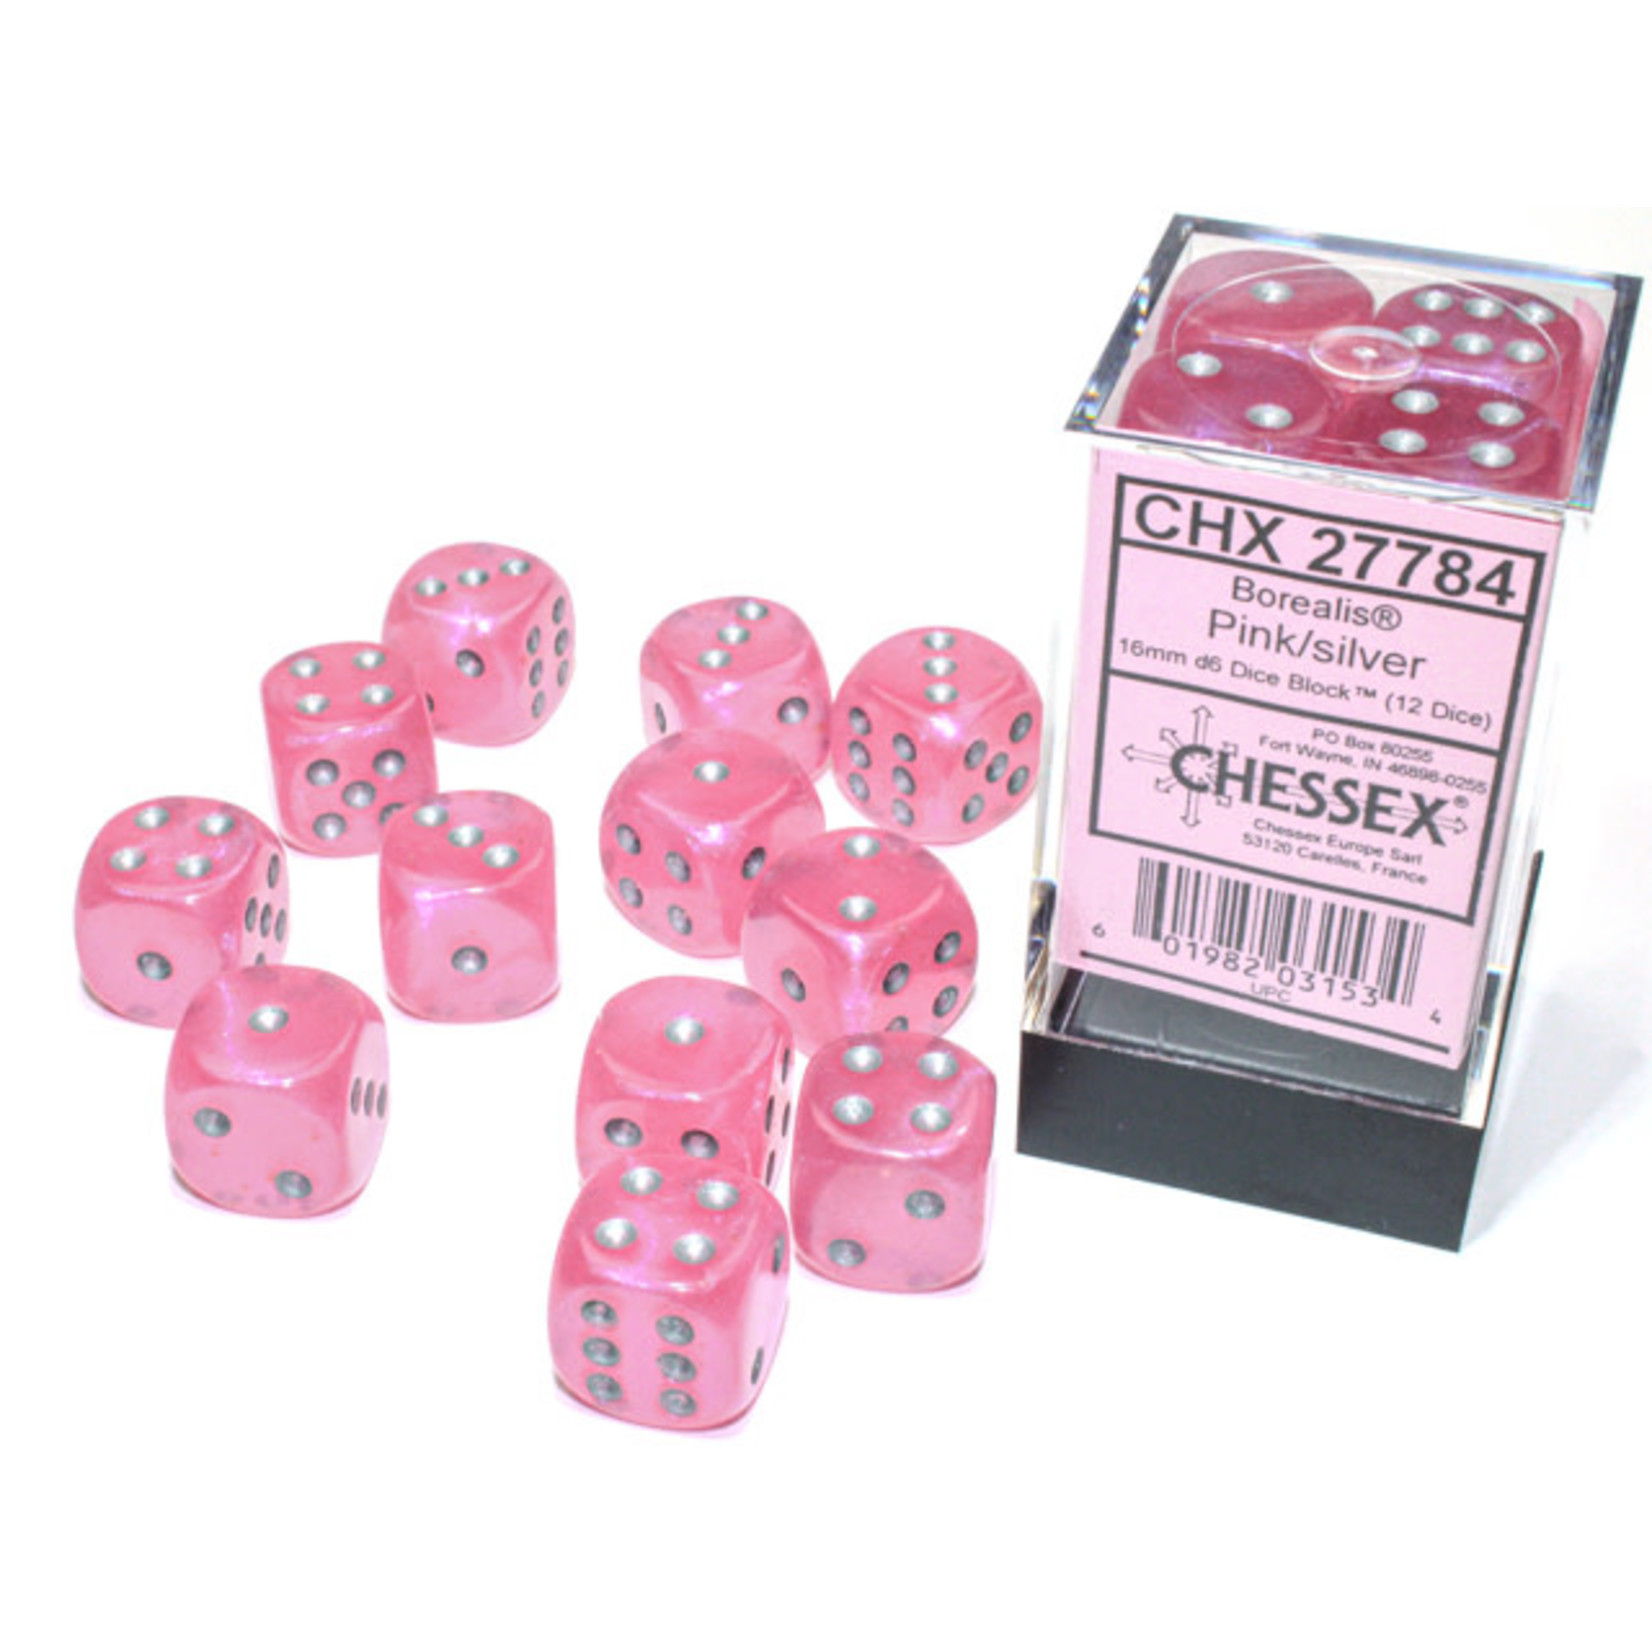 Chessex Borealis: 16mm d6 Pink/silver Luminary Dice (12)